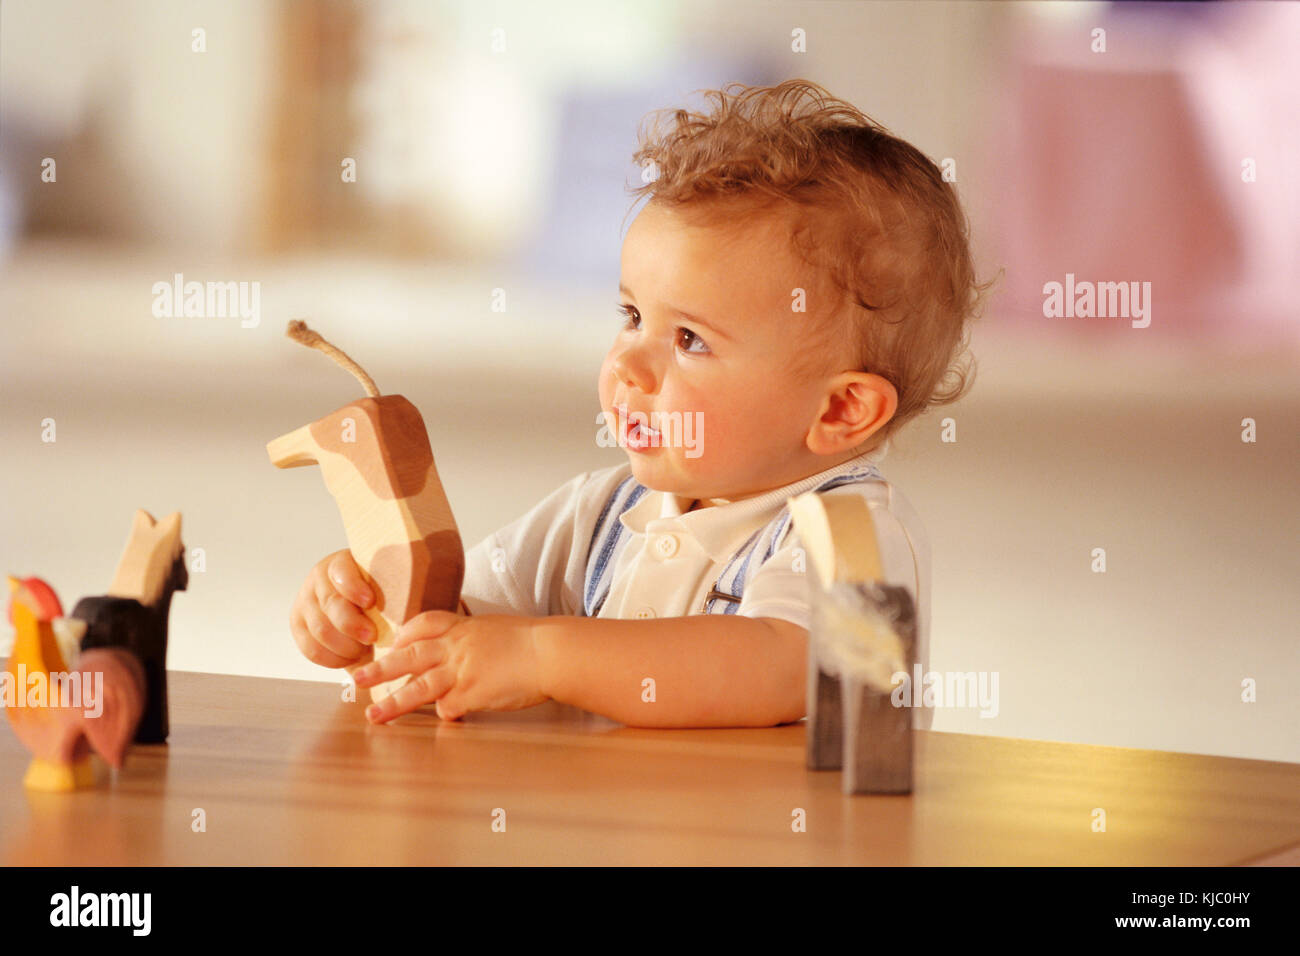 Toddler Playing with Wooden Toys Stock Photo